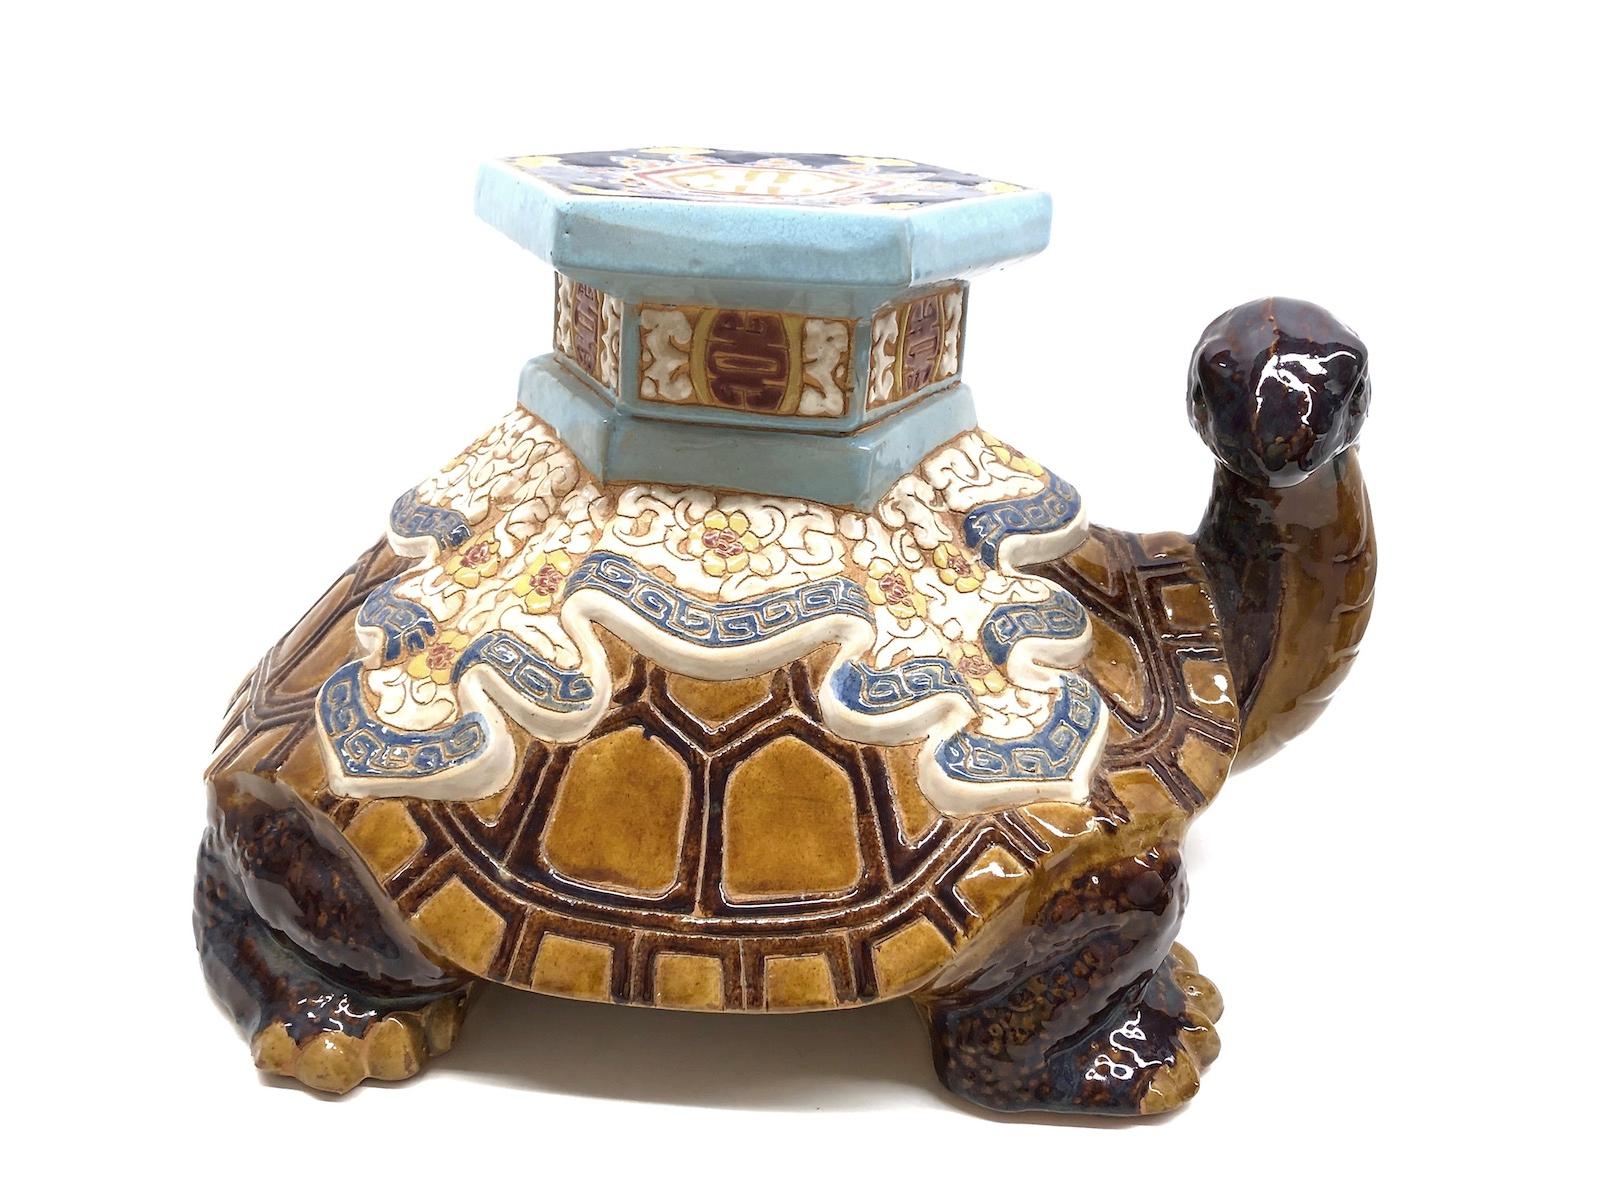 Mid-20th century glazed ceramic Turtle garden stool, flower pot seat, Patio decoration or side table. Handmade of ceramic. Nice addition to your home, patio or garden. A nice addition to any room, patio or yard.
 